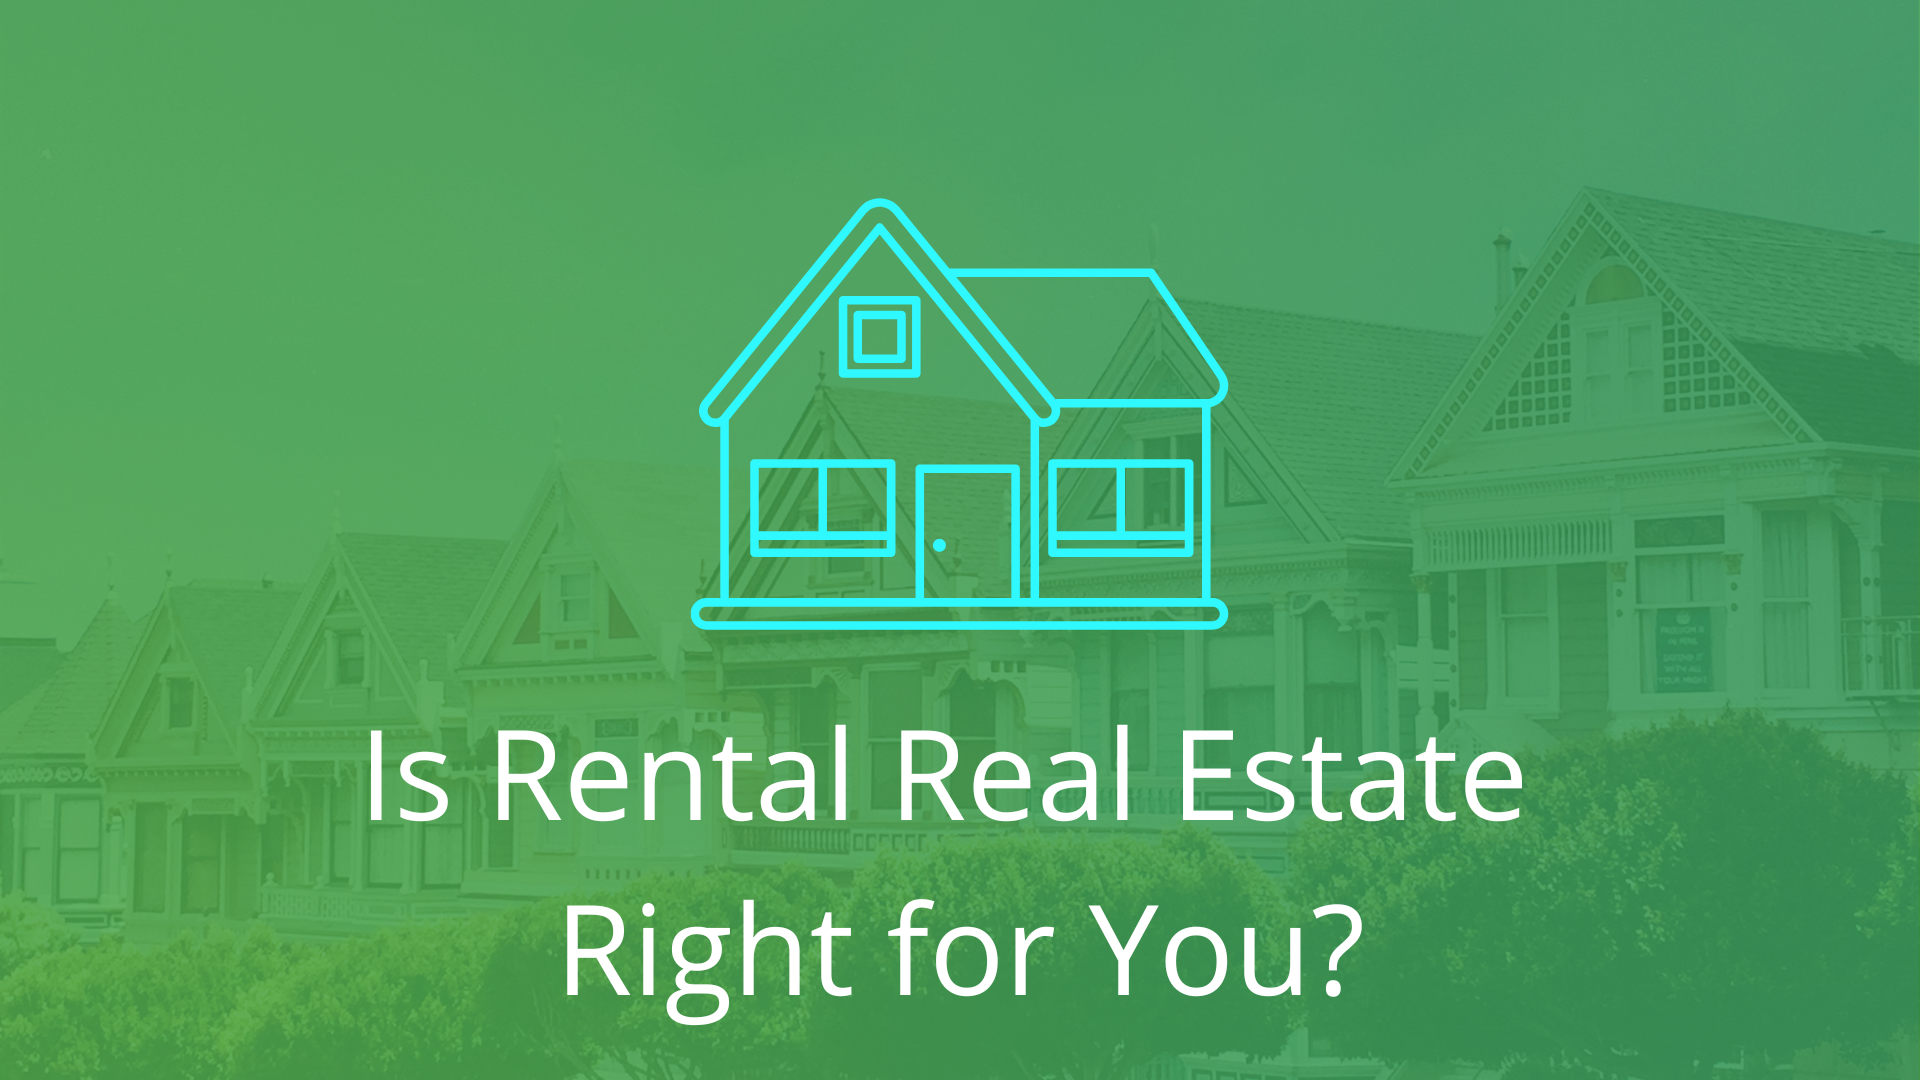 Is rental real estate right for you?